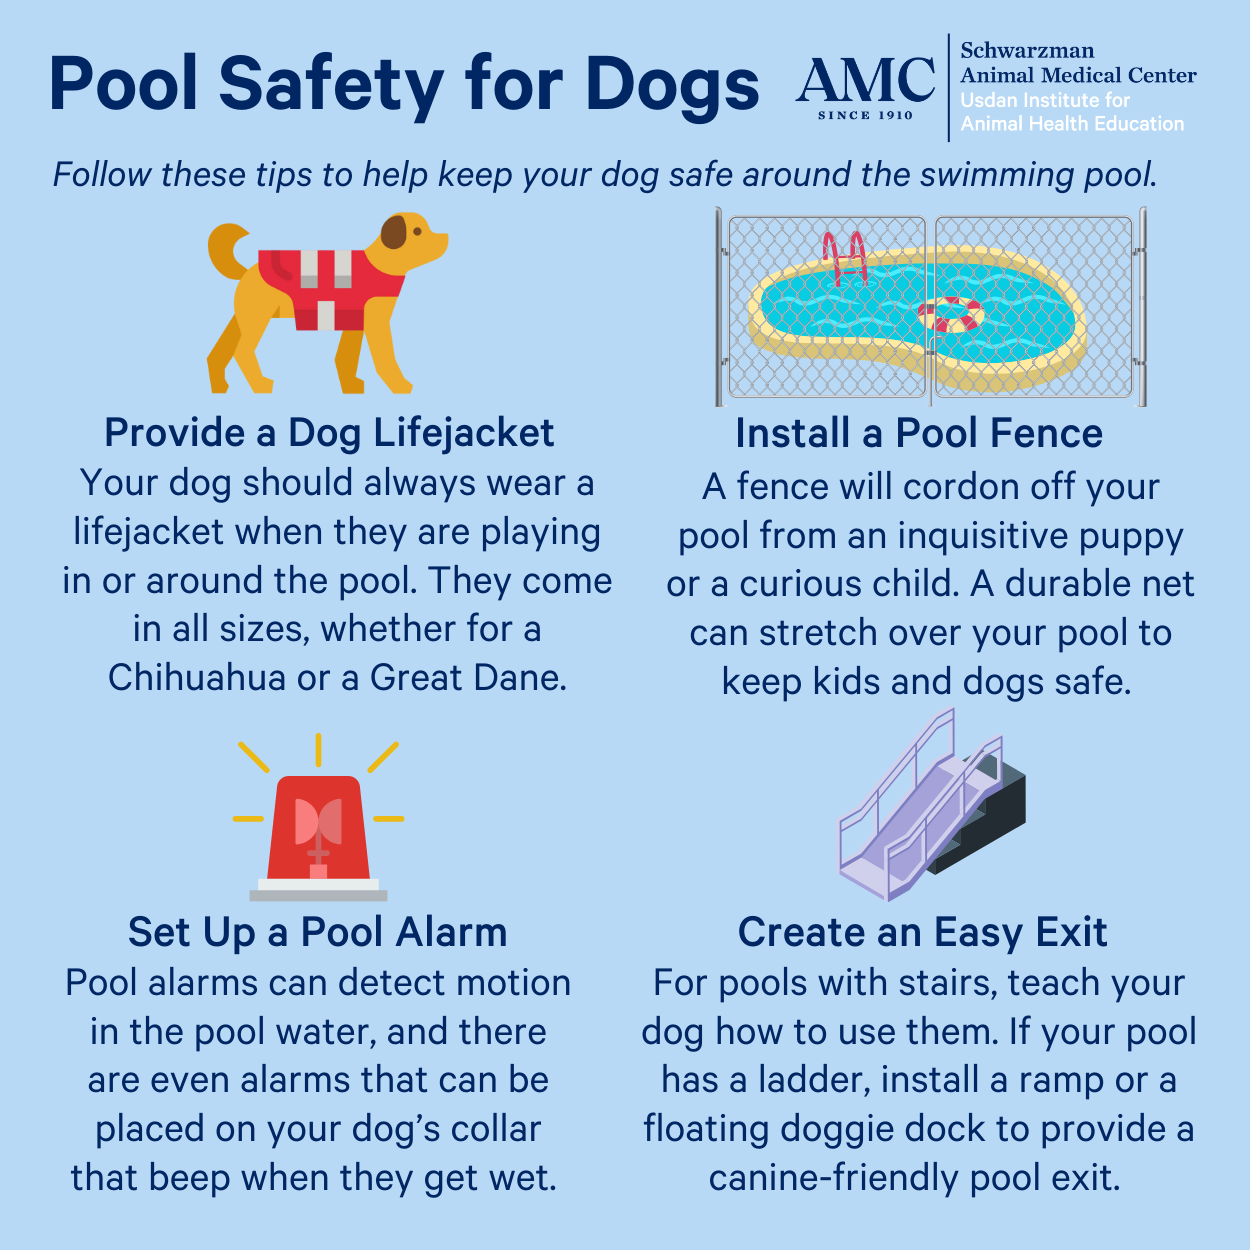 Pool Safety for Dogs. Follow these tips to help keep your dog safe around the swimming pool. Provide a Dog Lifejacket. Your dog should always wear a lifejacket when they are playing in or around the pool. They come in all sizes, whether for a Chihuahua or a Great Dane. Install a Pool Fence. A fence will cordon off your pool from an inquisitive puppy or a curious child. A durable net can stretch over your pool to keep kids and dogs safe. Set Up a Pool Alarm. Pool alarms can detect motion in the pool water, and there are even alarms that can be placed on your dog's collar that beep when they get wet. Create an Easy Exit. For pools with stairs, teach your dog how to use them. If your pool has a ladder, install a ramp or a floating doggie dock to provide a canine-friendly pool exit.